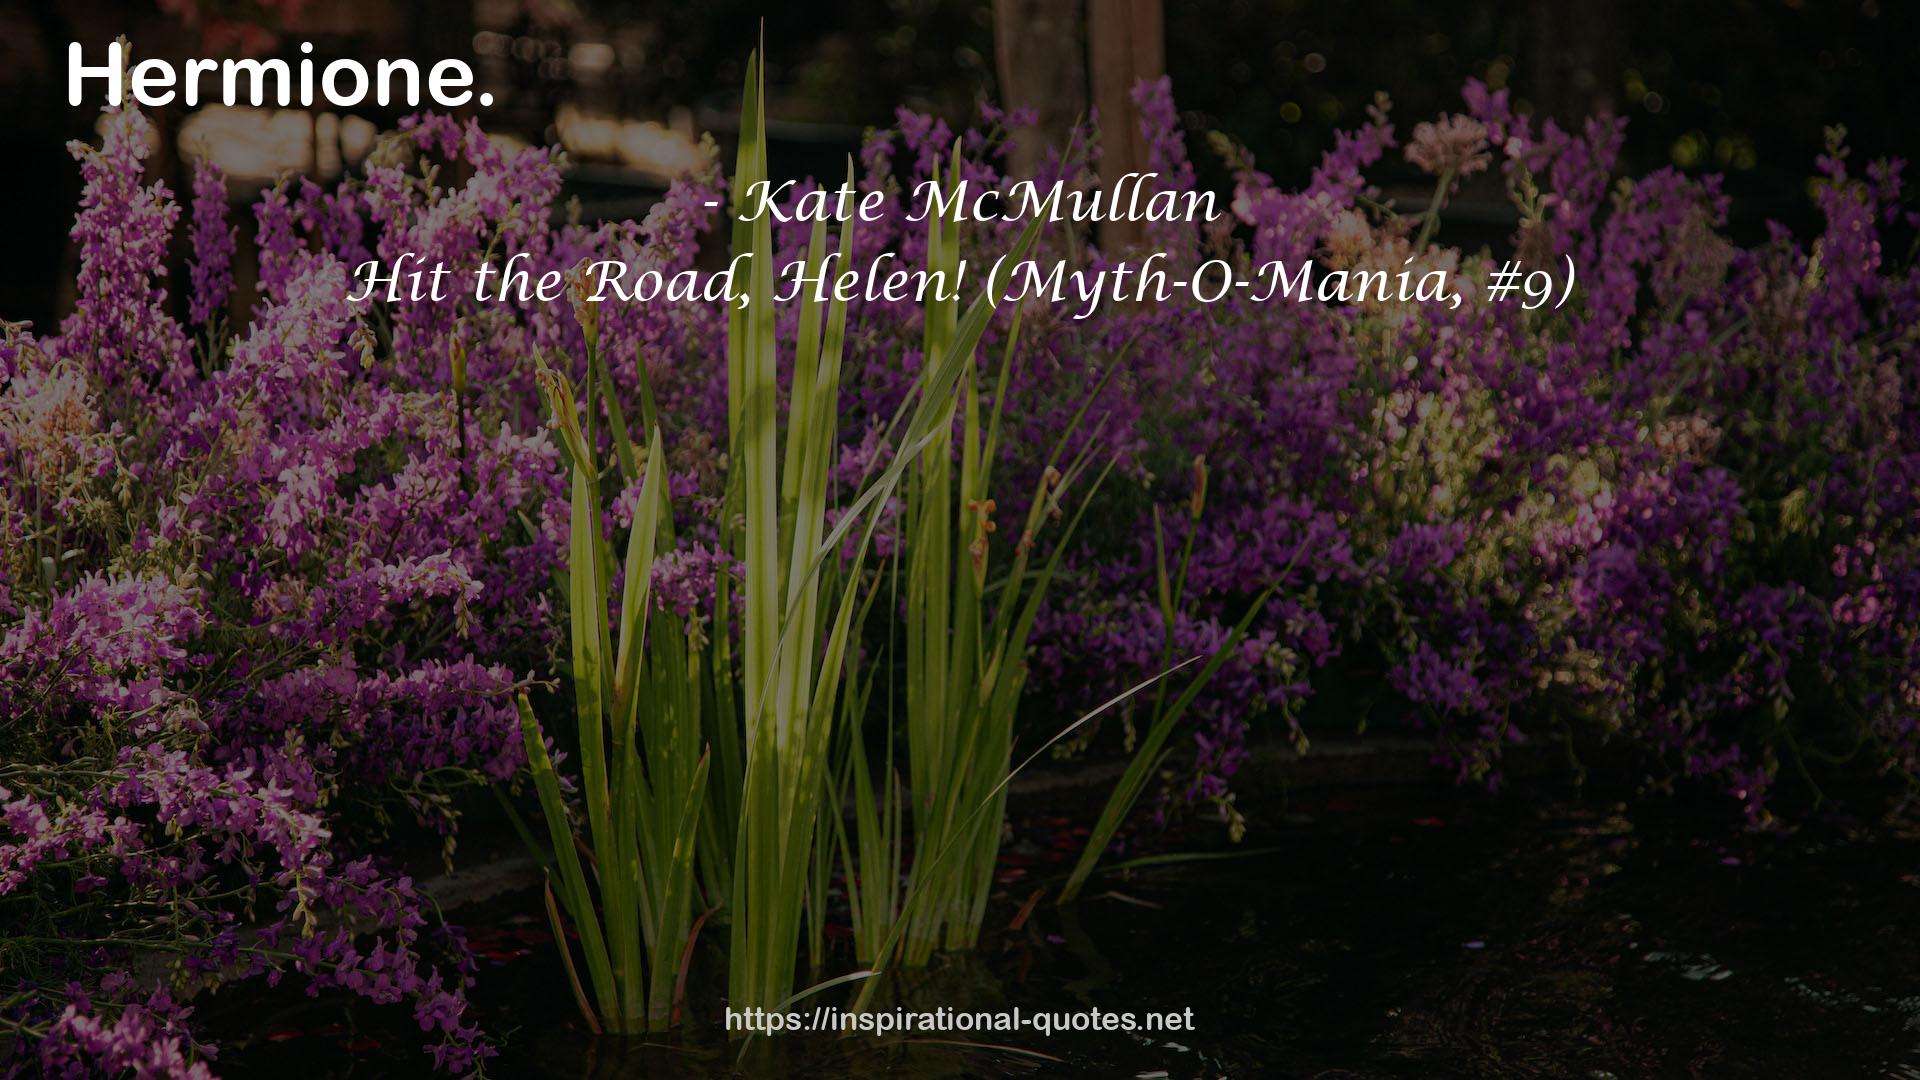 Kate McMullan QUOTES